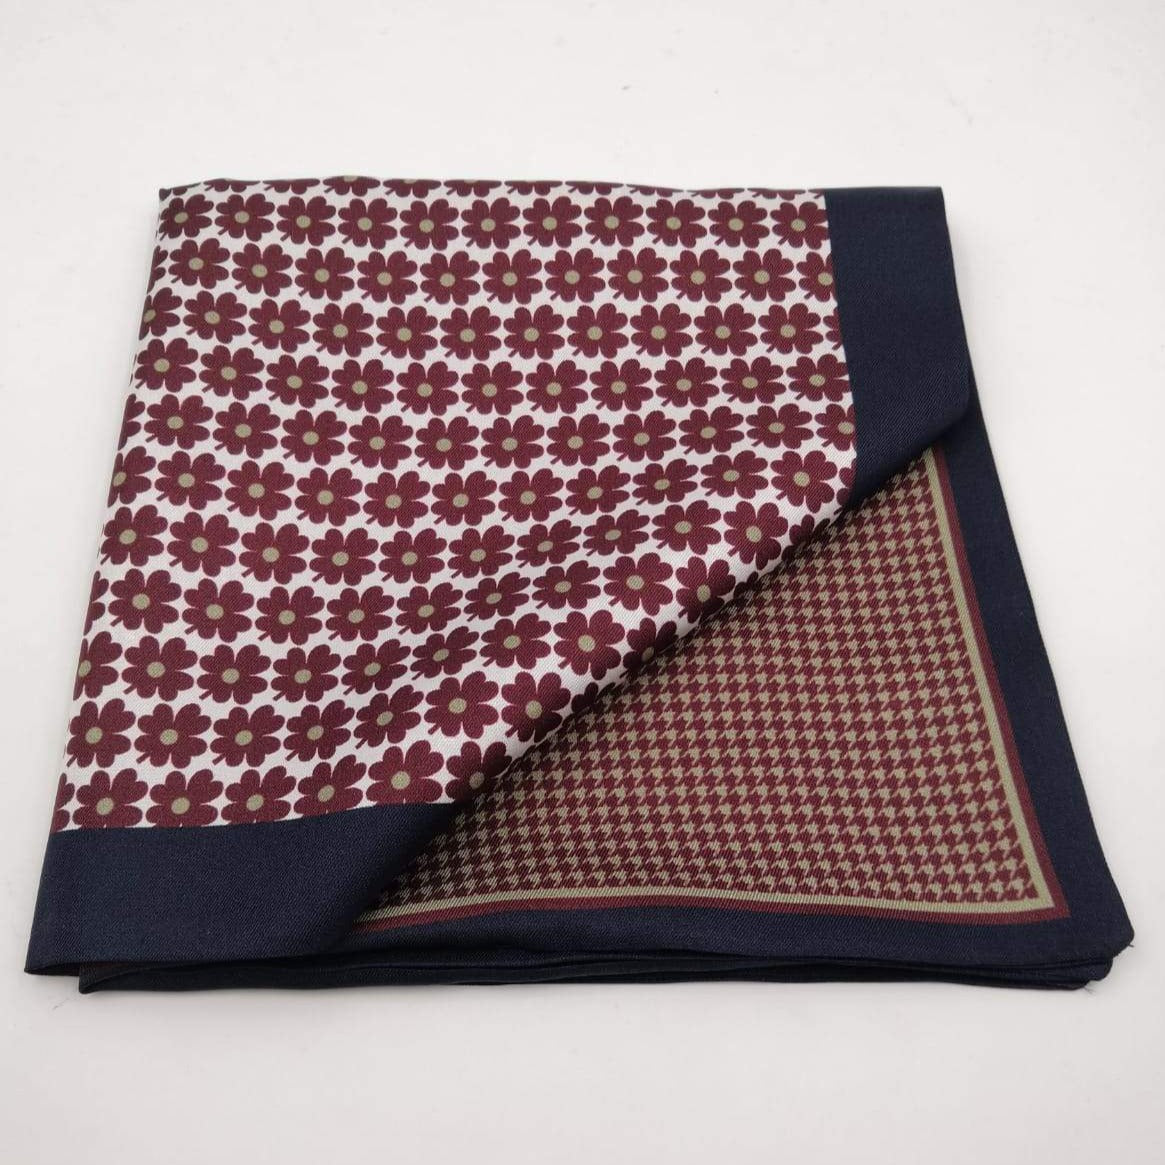 Cruciani & Bella 100% Silk Blue, White and Brown Double Floreal Motif Pocket Square Double Faces Made in Italy 33 cm X 33 cm #6153